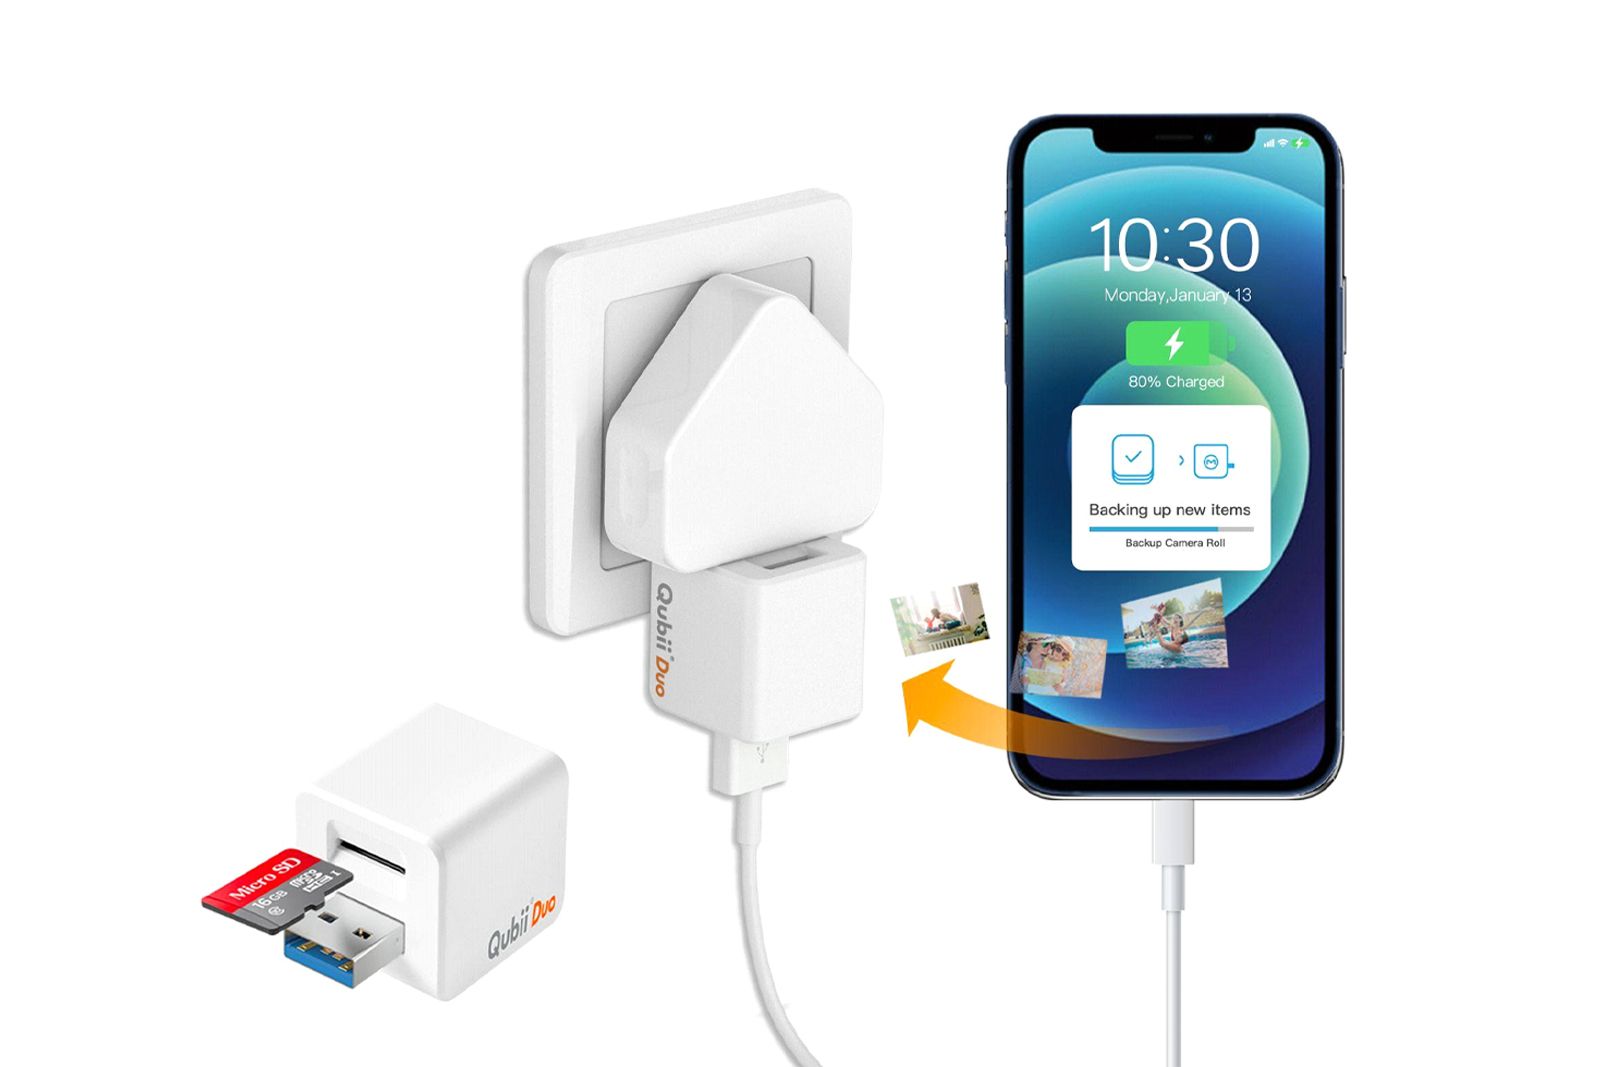 Qubii Duo is the perfect way to charge and back up your Android device photo 2